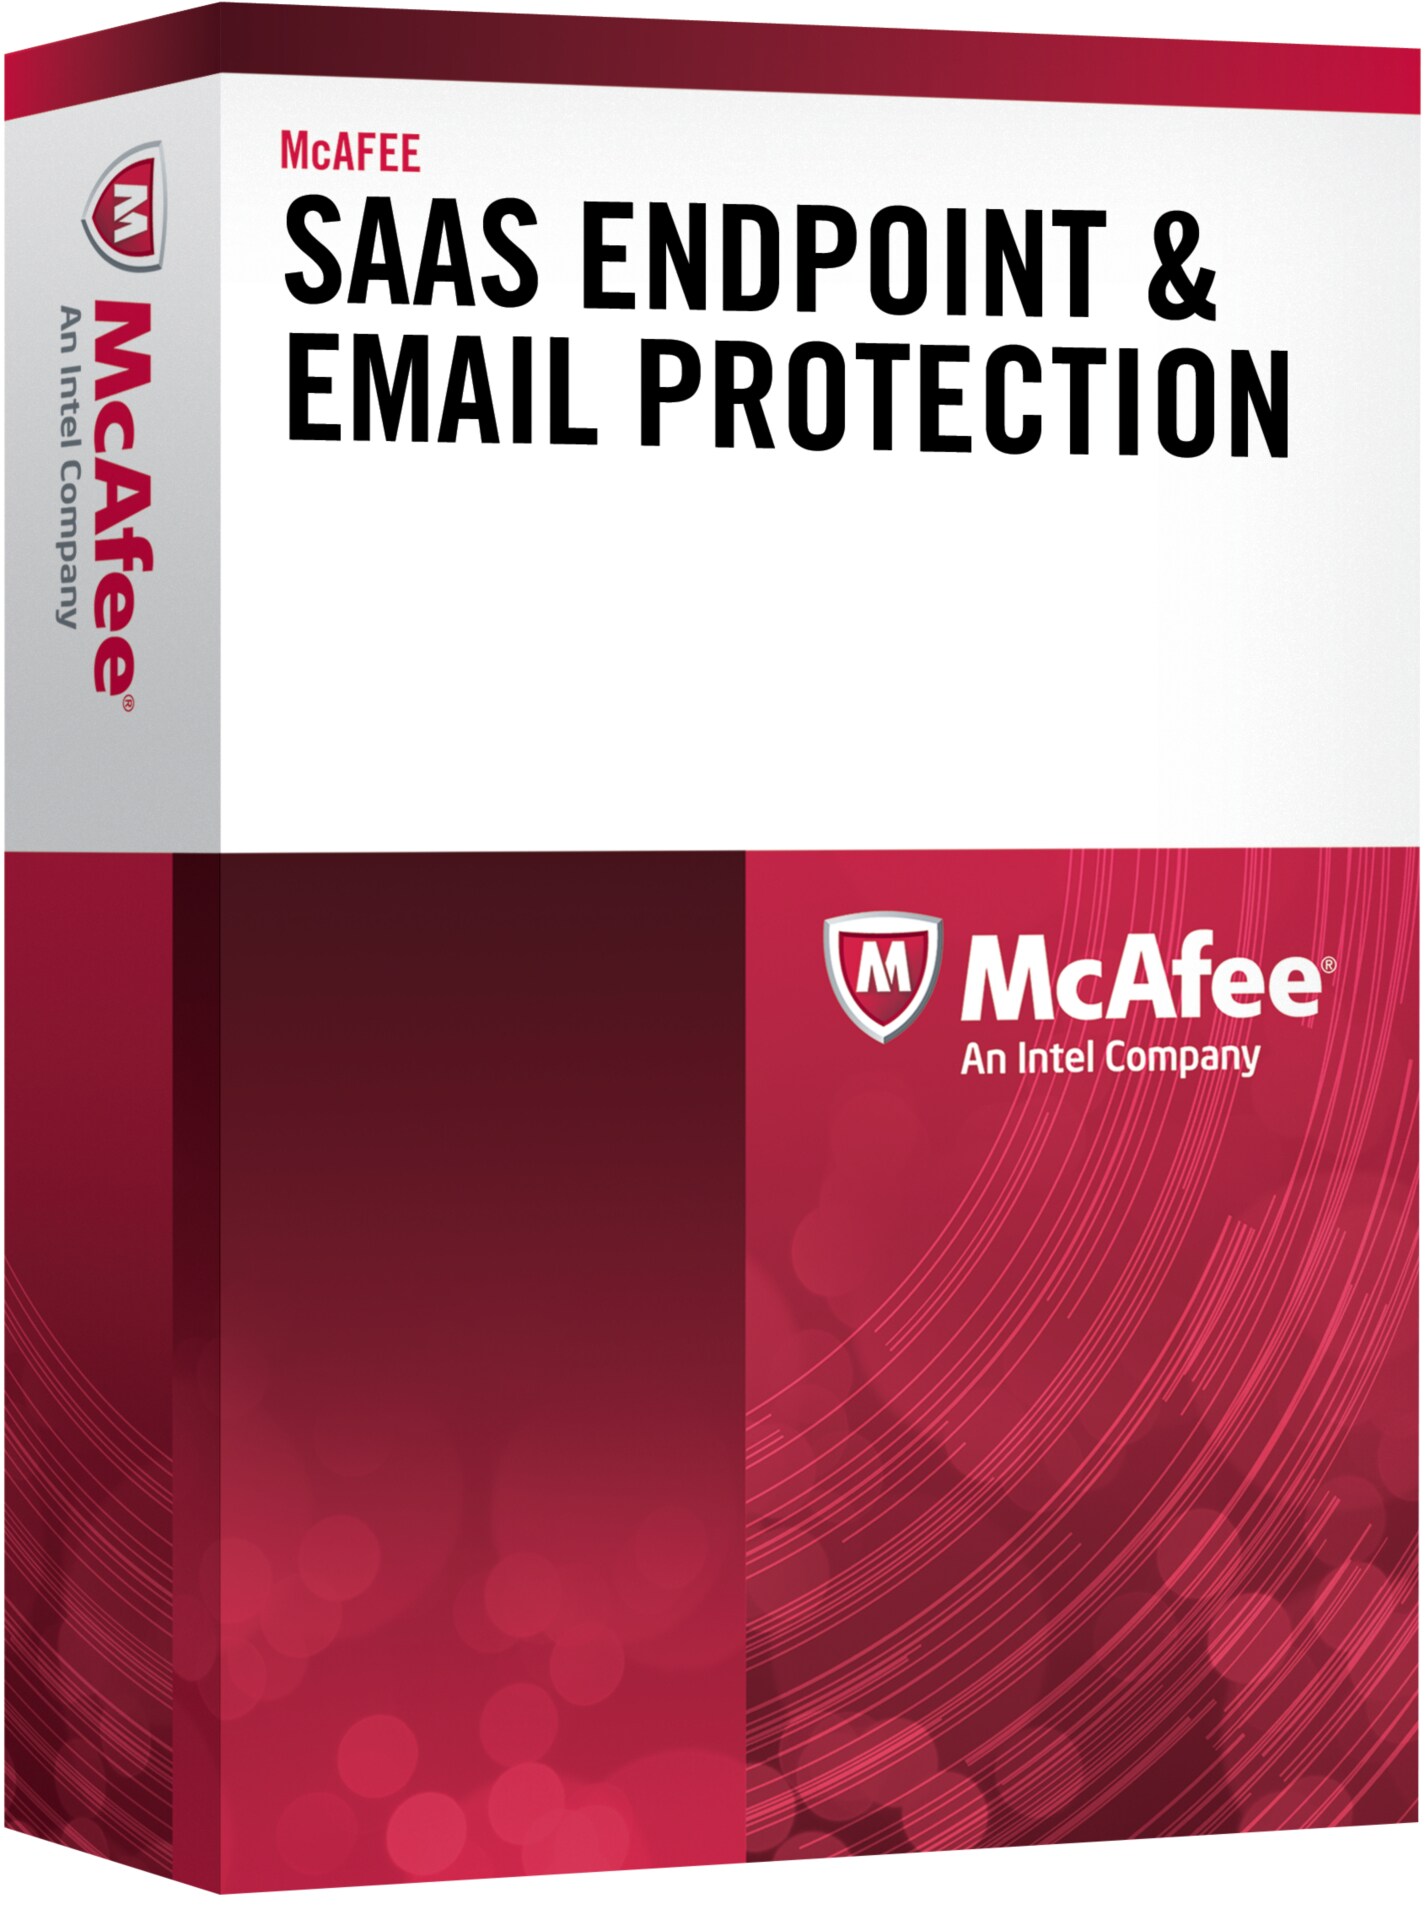 McAfee SaaS Endpoint & Email Protection Suite - subscription license (1 year) + 1 Year Gold Support - 1 node